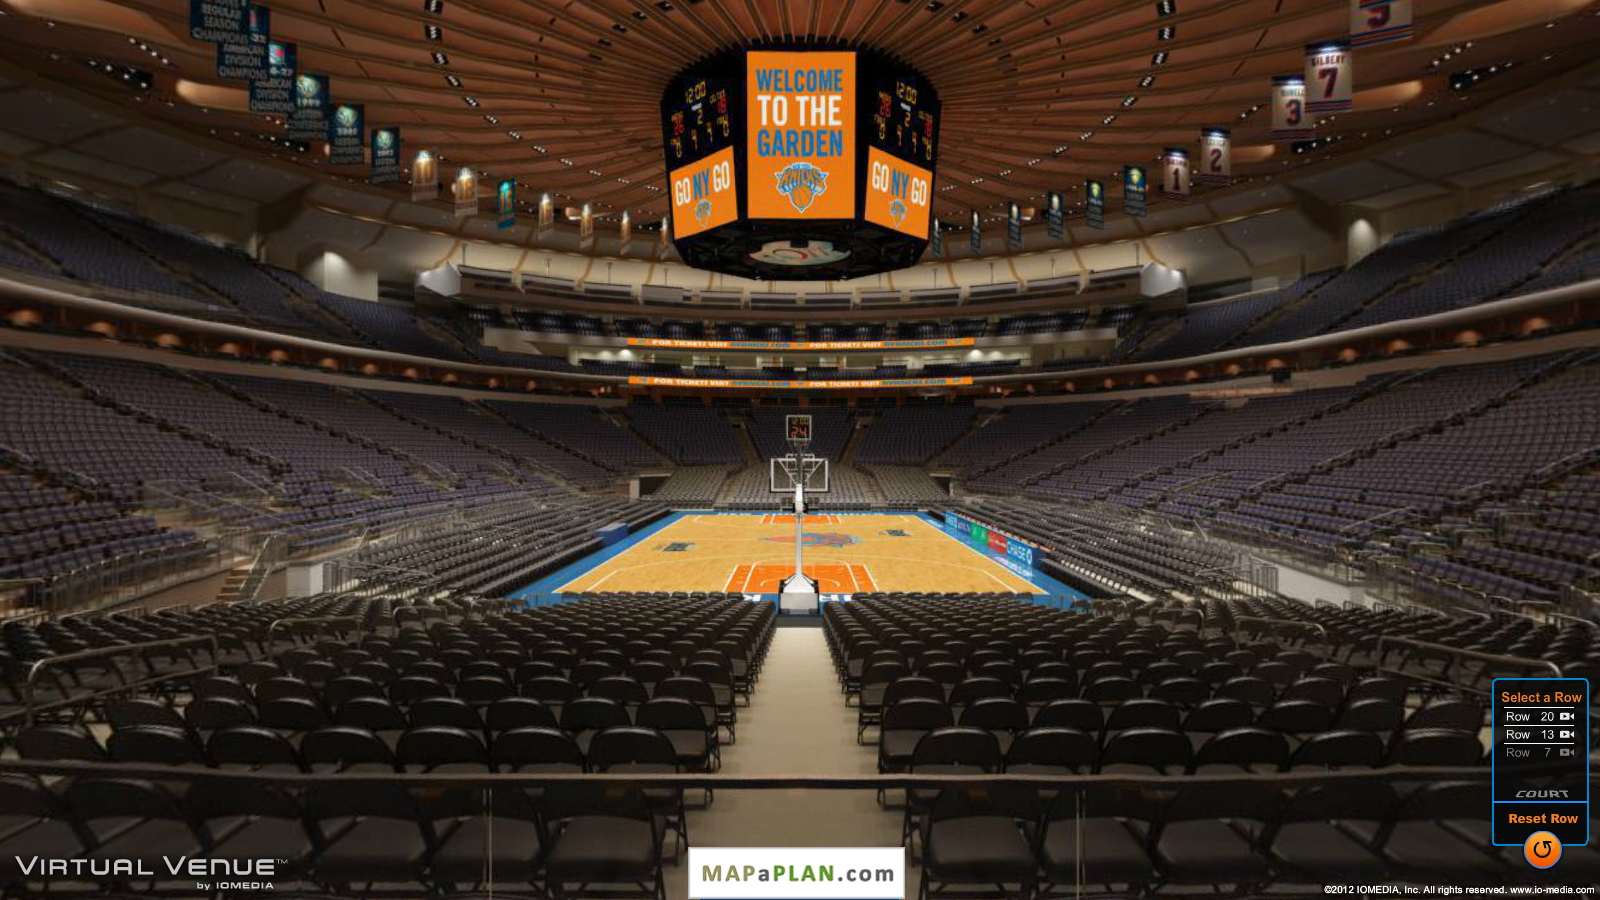 Madison Square Garden Seating Chart Section 102 View Mapaplan Com